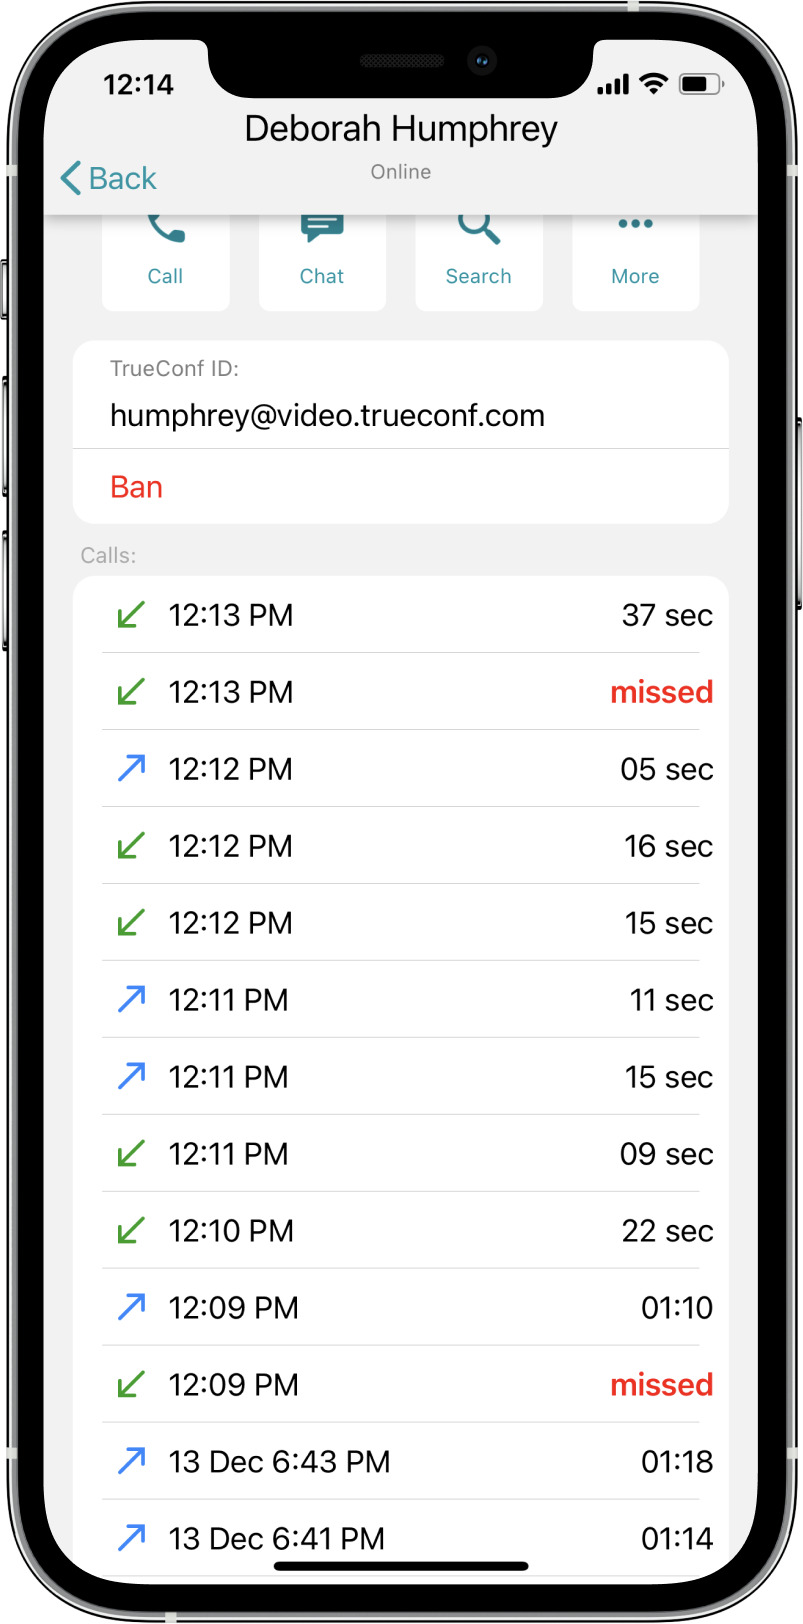 TrueConf 3.3 for iOS: new UI, Smart meeting mode, offline access to chats, contacts, and call history 16